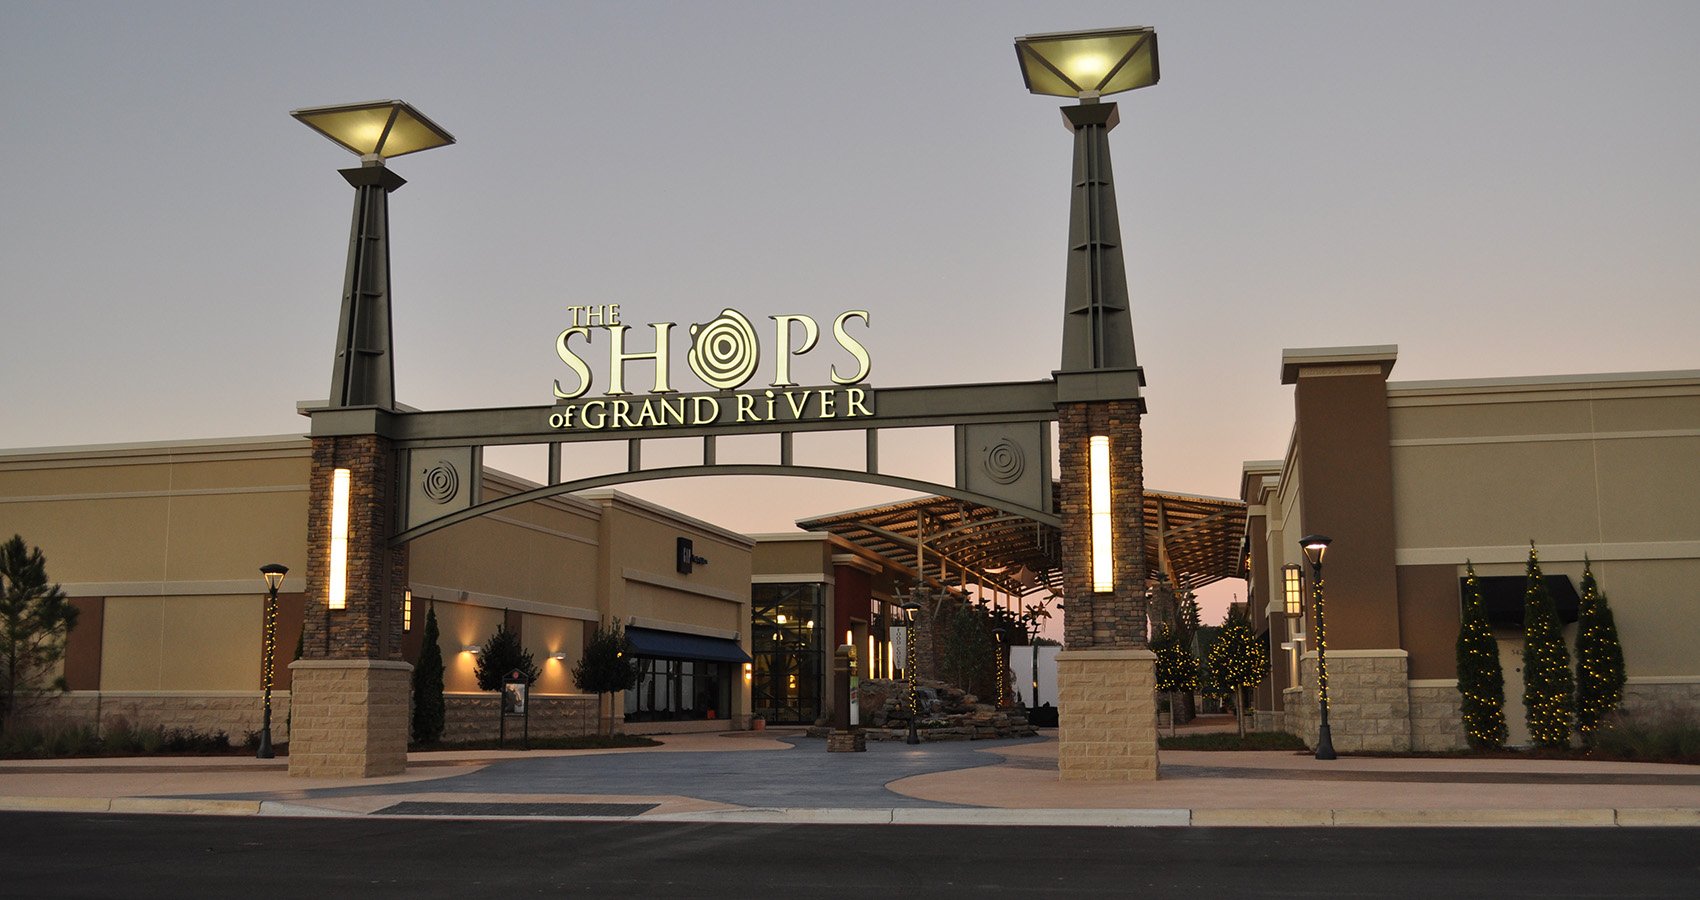 The Outlet Shops of Grand River - Dainel